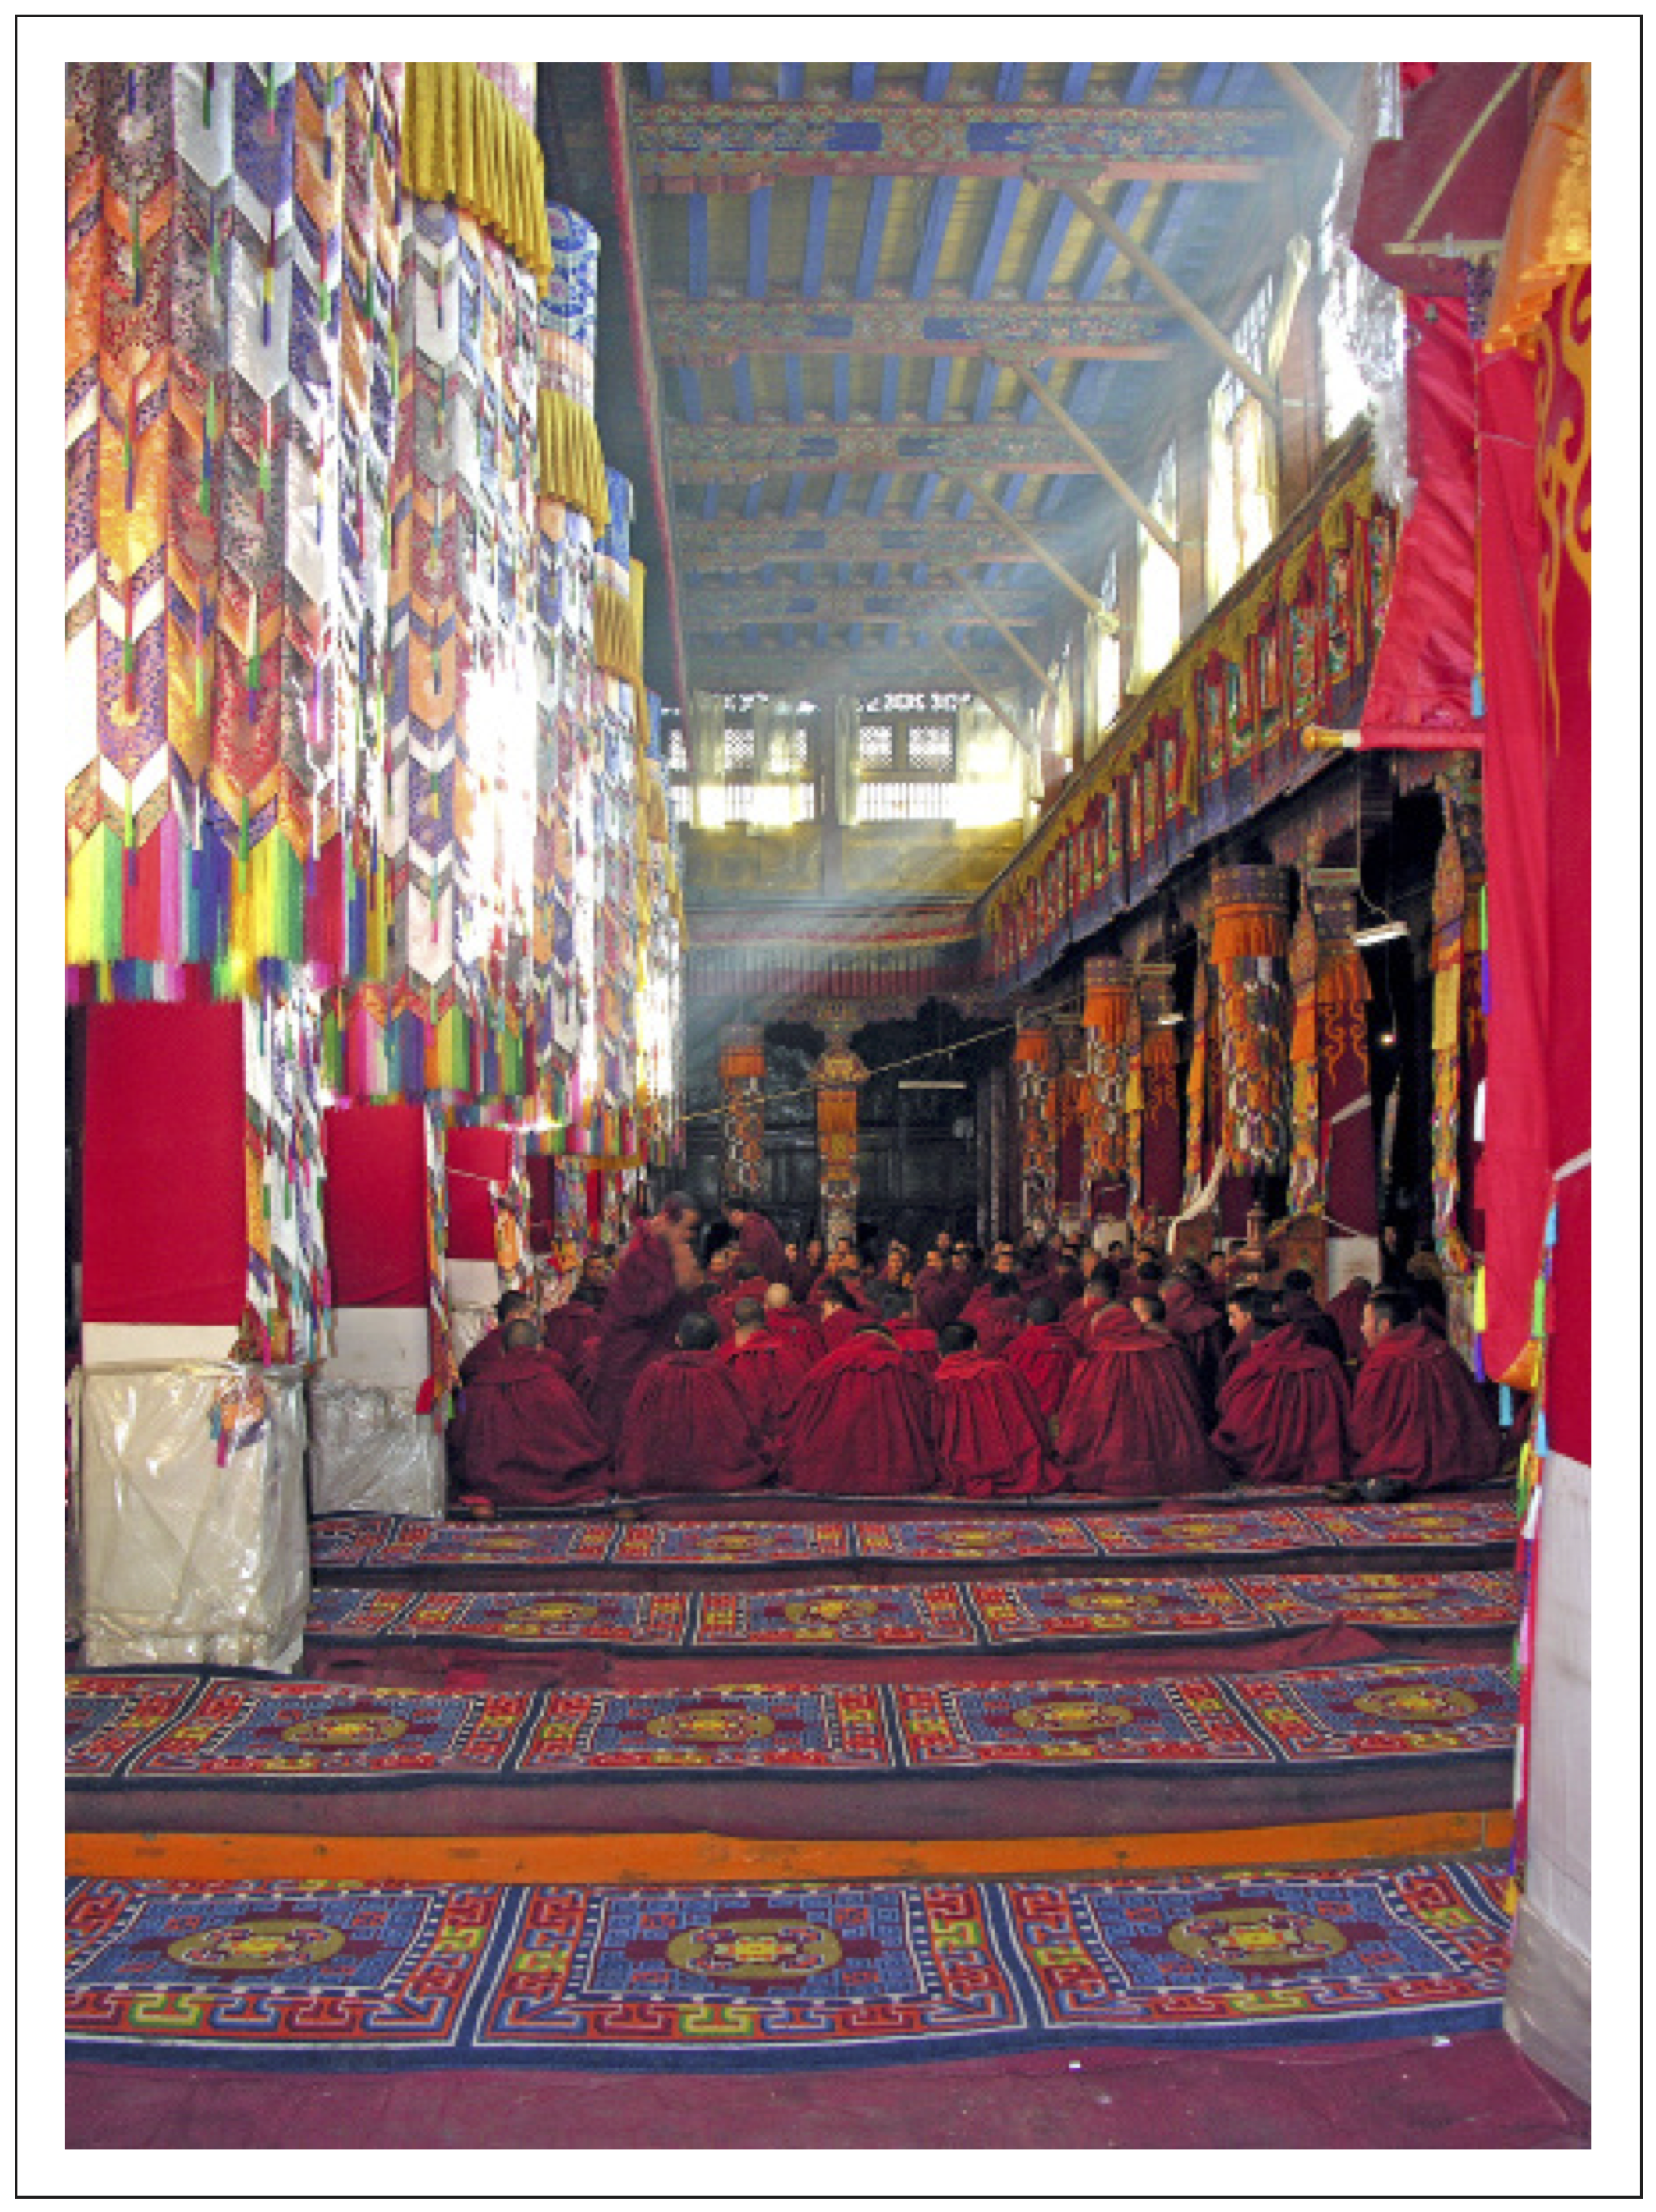 Tibetan Buddhist Monks in the great assembly hall at Drepung Monastery, Lhasa, Tibet